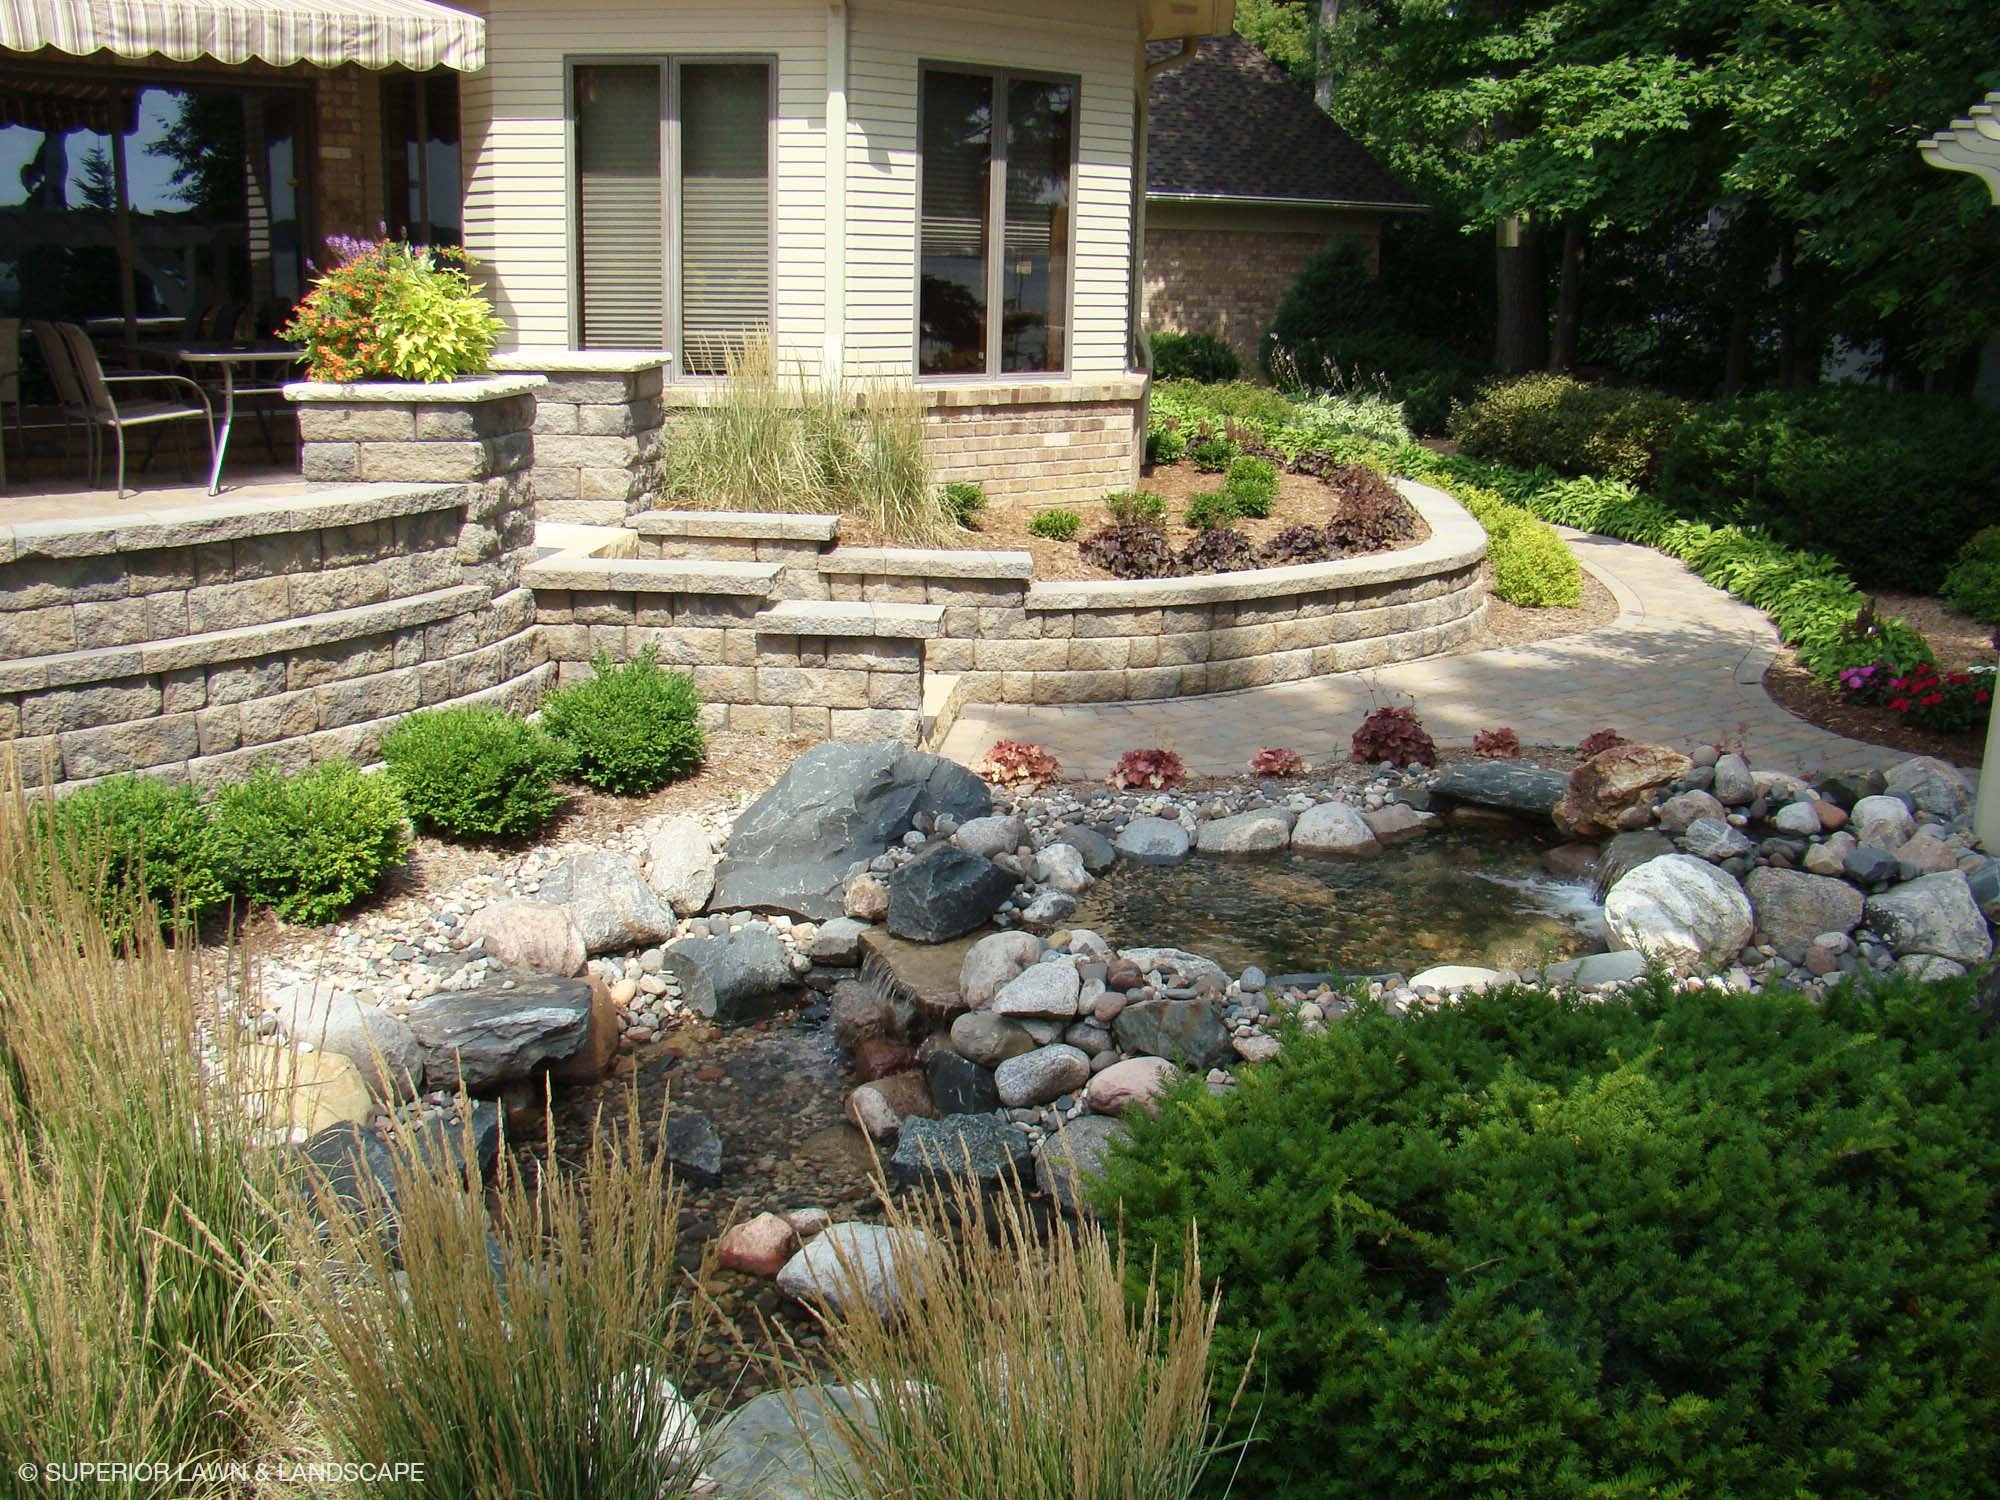 superior-lawn-landscape-water-features-006-front-yard-stone-ponds.jpg